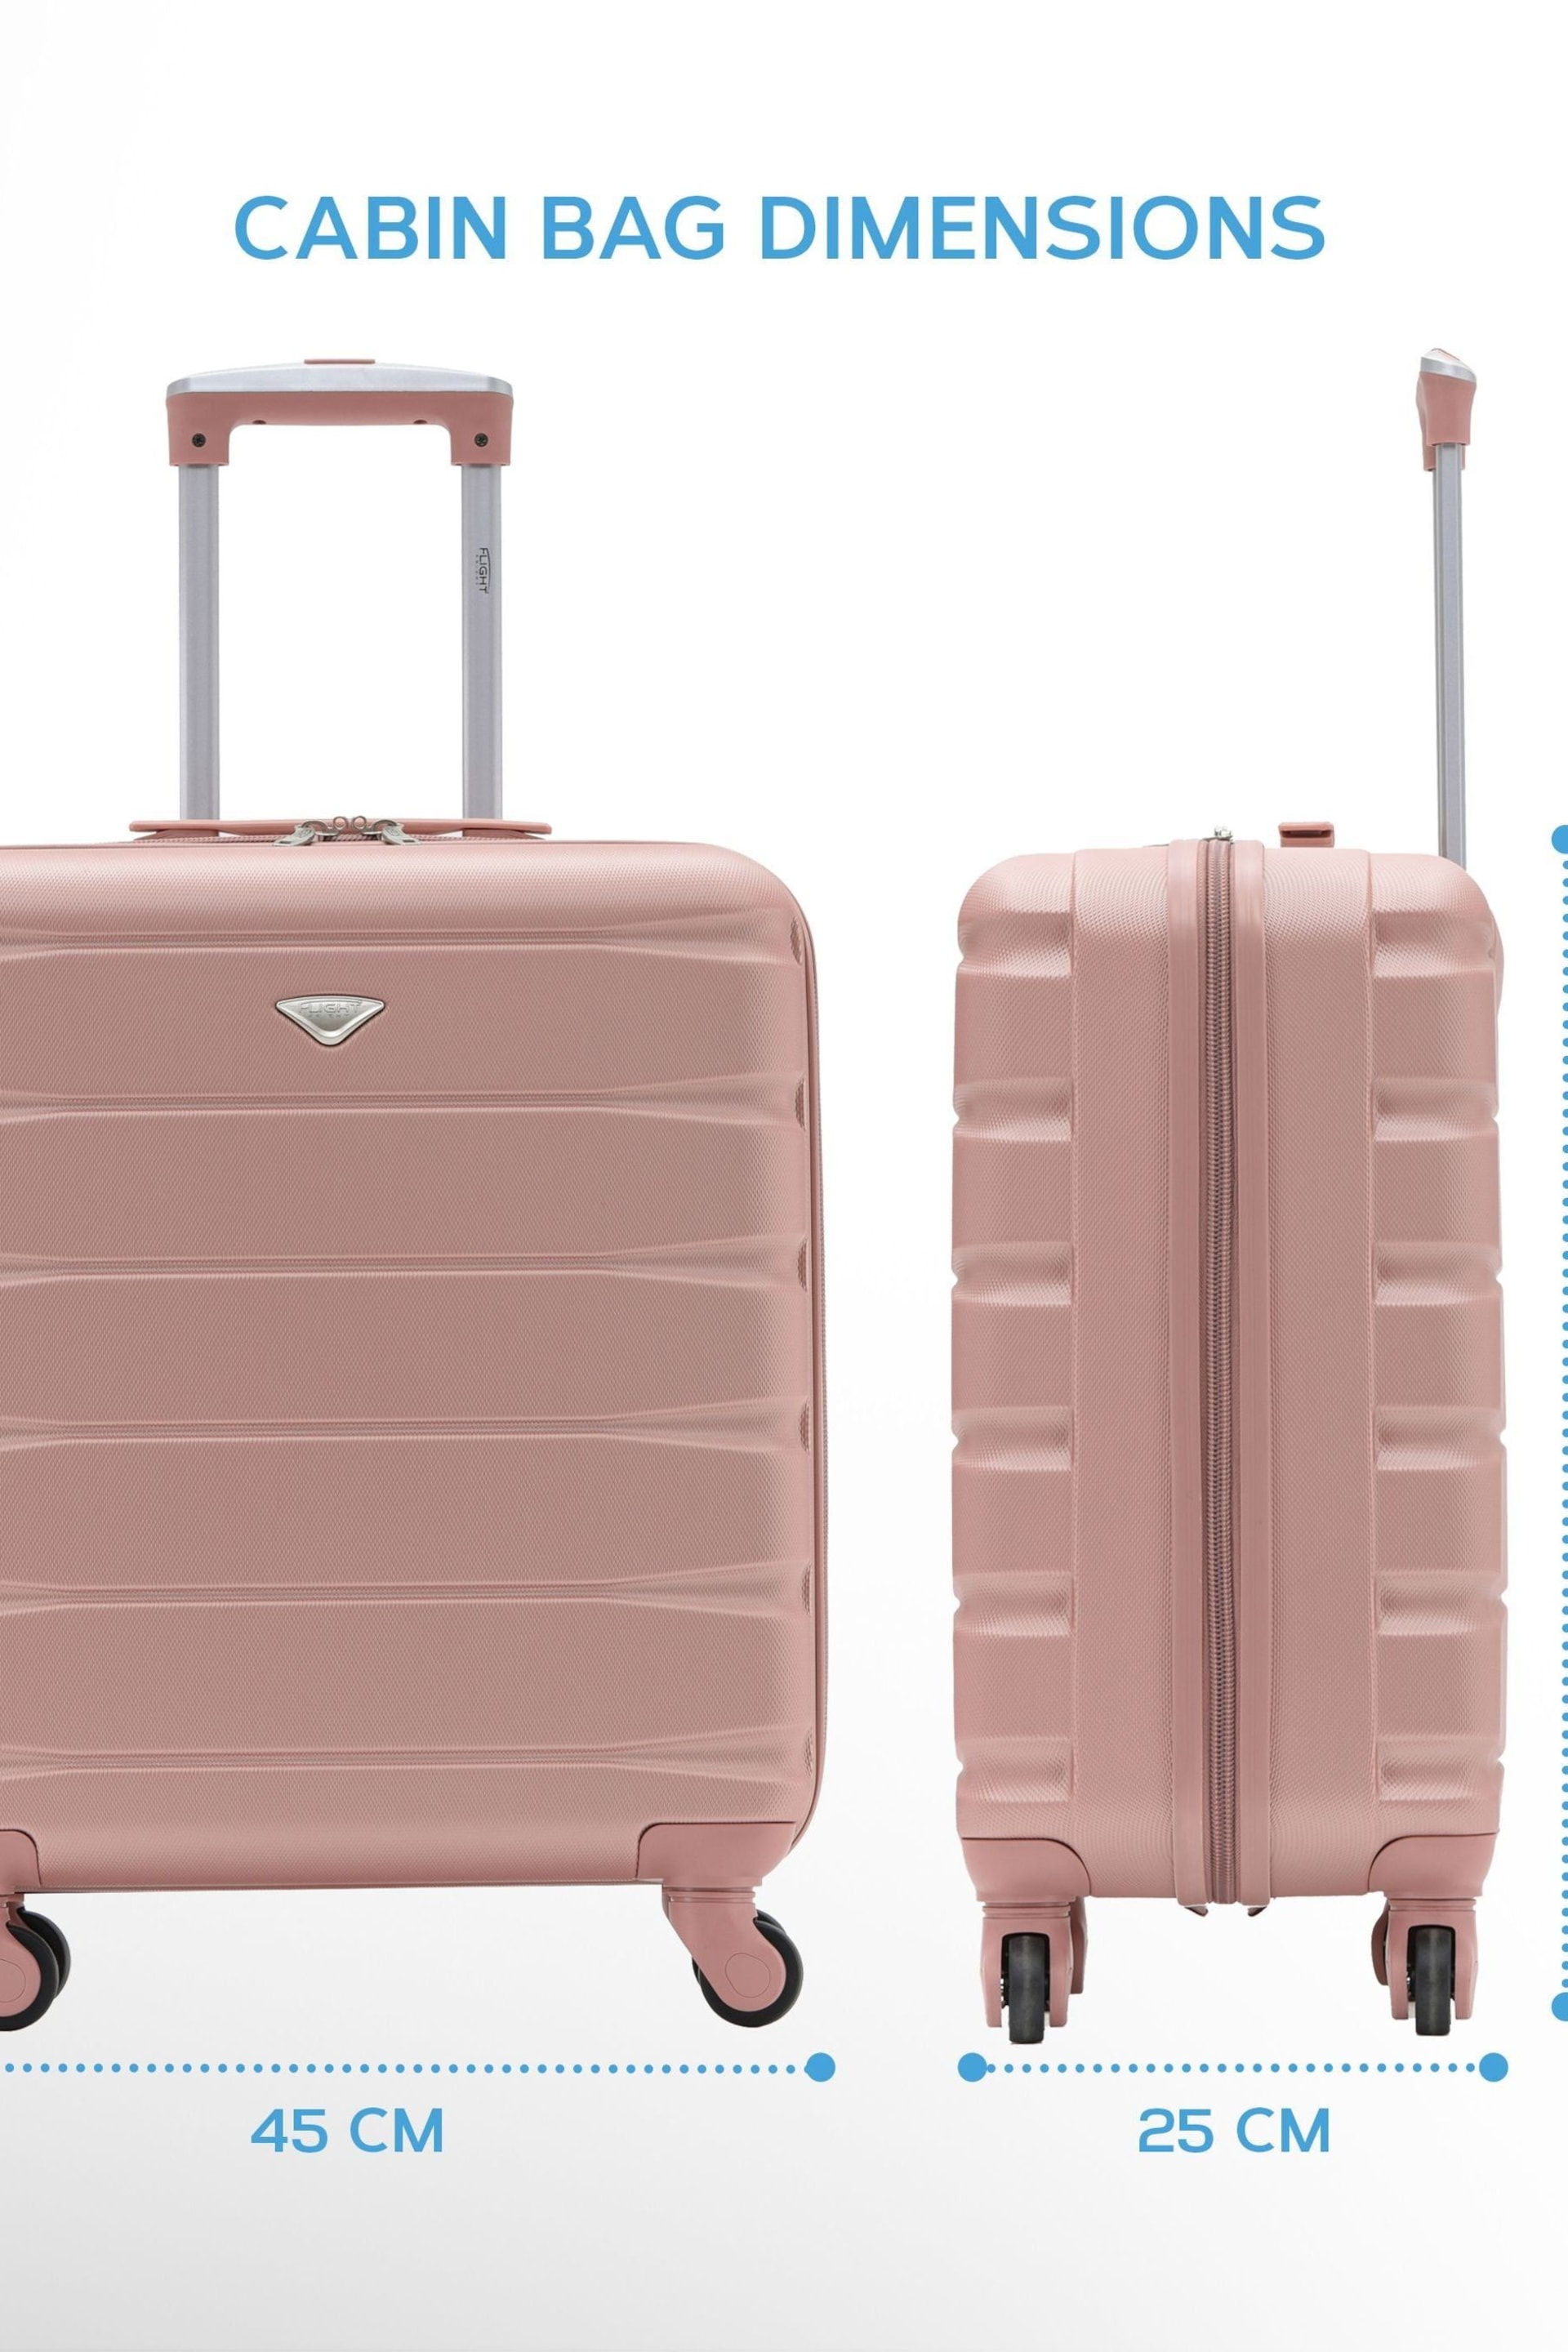 Flight Knight Rose Gold/Charcoal EasyJet 56x45x25cm Overhead 4 Wheel ABS Hard Case Cabin Carry On Suitcase Set Of 2 - Image 7 of 9